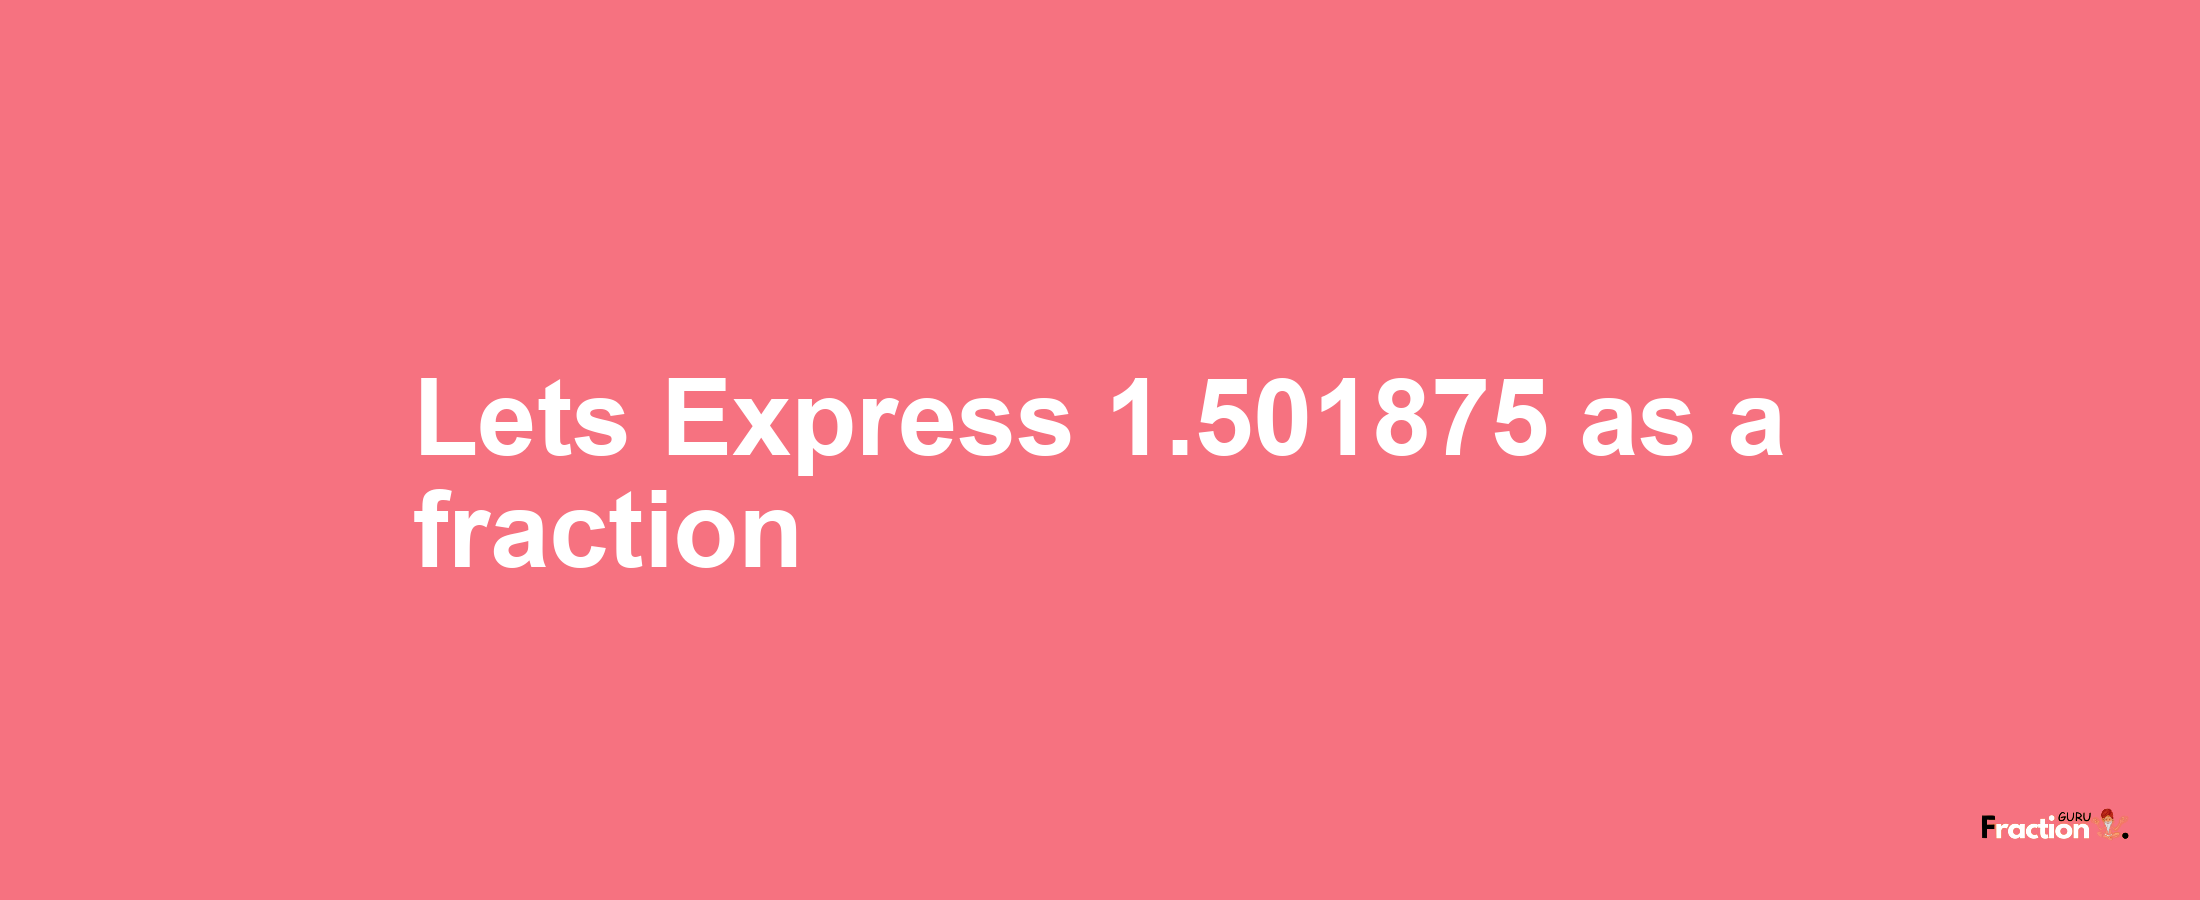 Lets Express 1.501875 as afraction